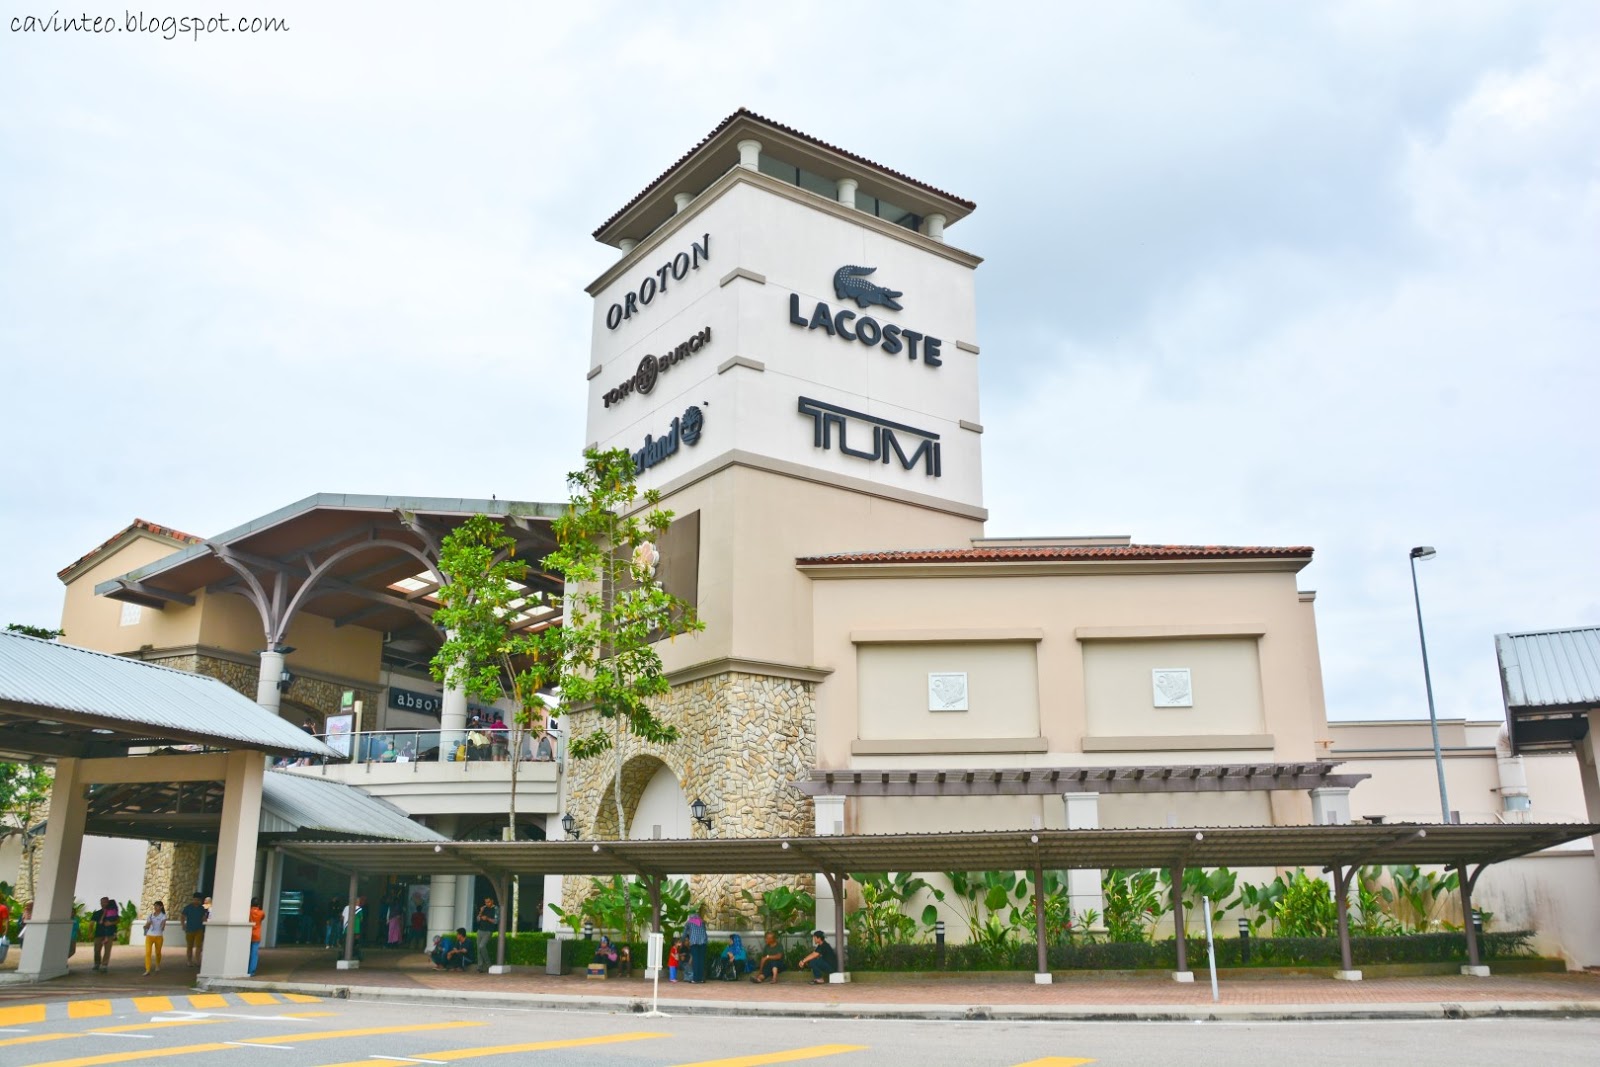 Johor premium outlets editorial image. Image of beautiful - 60477655